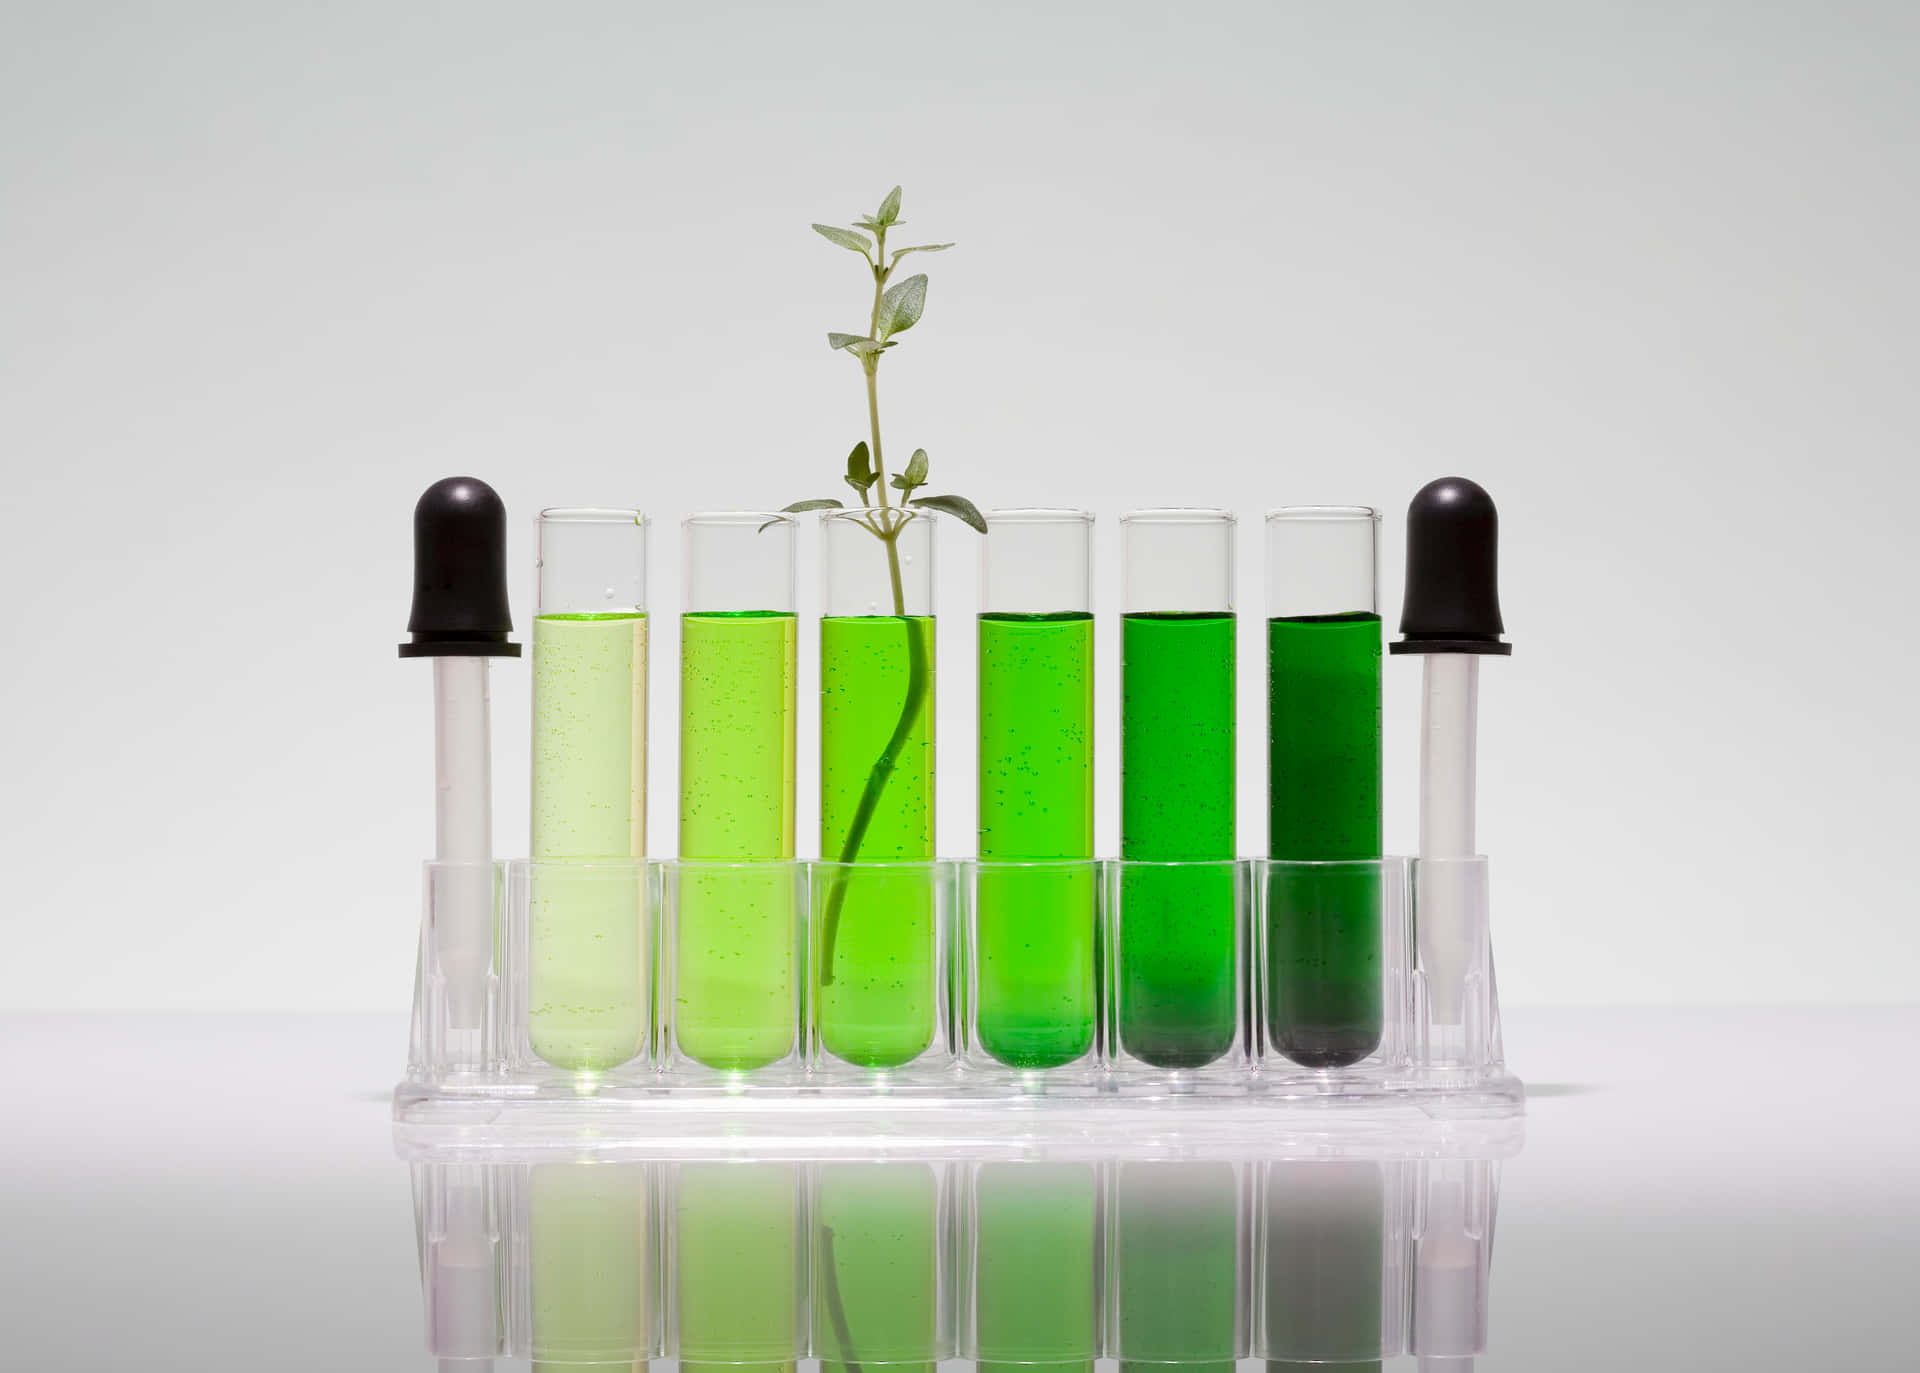 A scientist working on green chemistry experiments in the laboratory Wallpaper